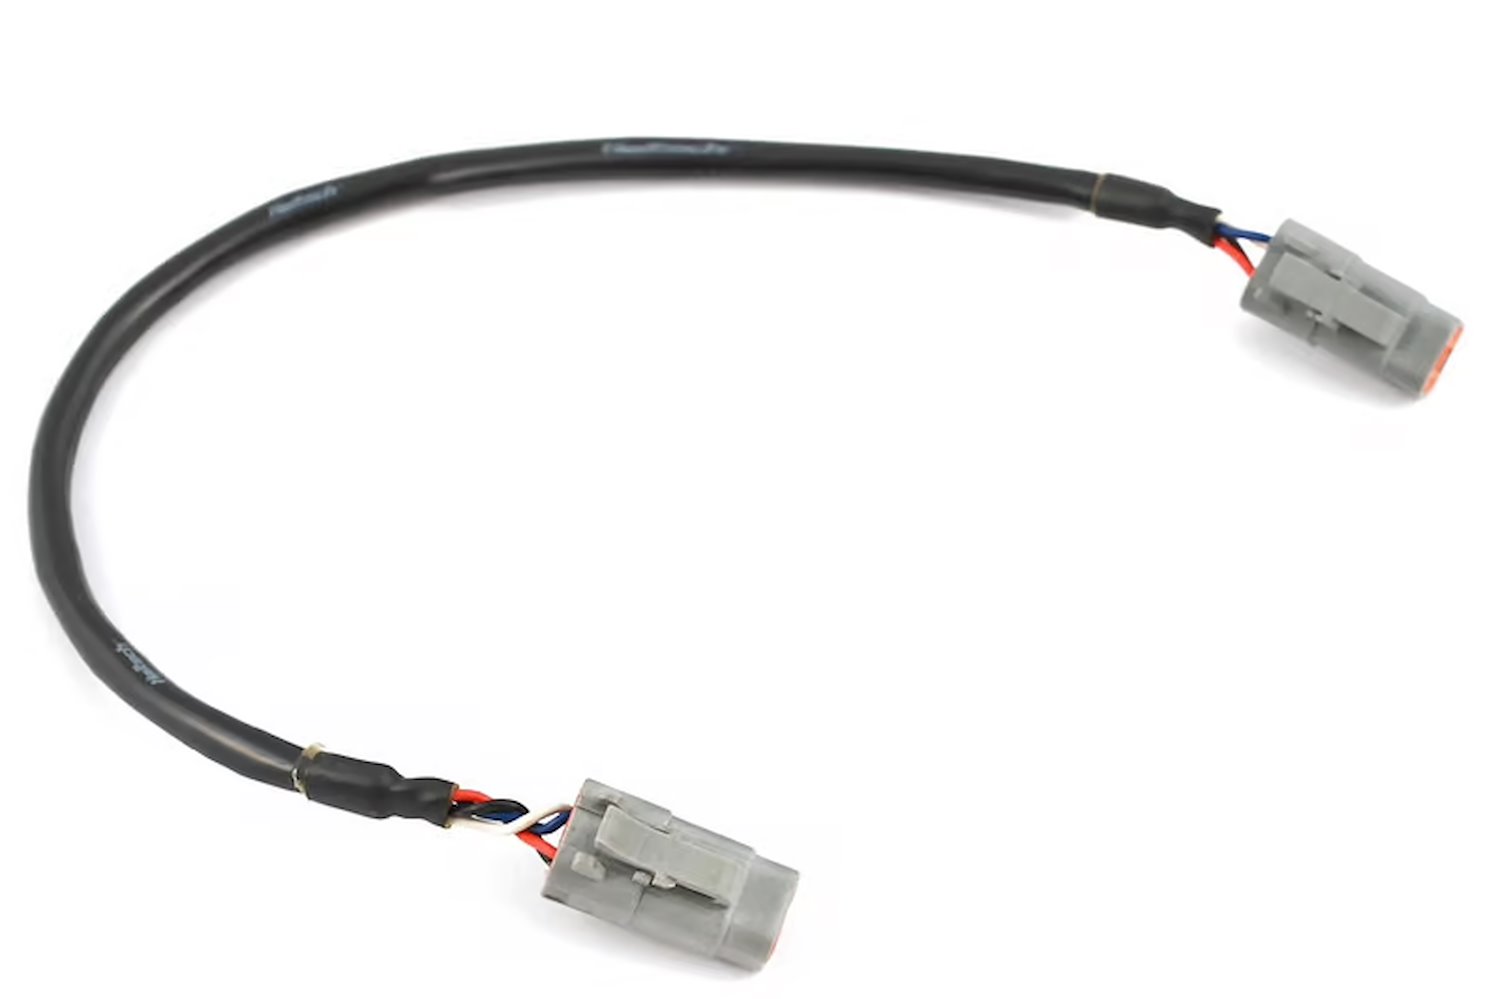 HT-130024 Elite CAN Cable, DTM-4 to DTM-4, 900 mm (36 in.)